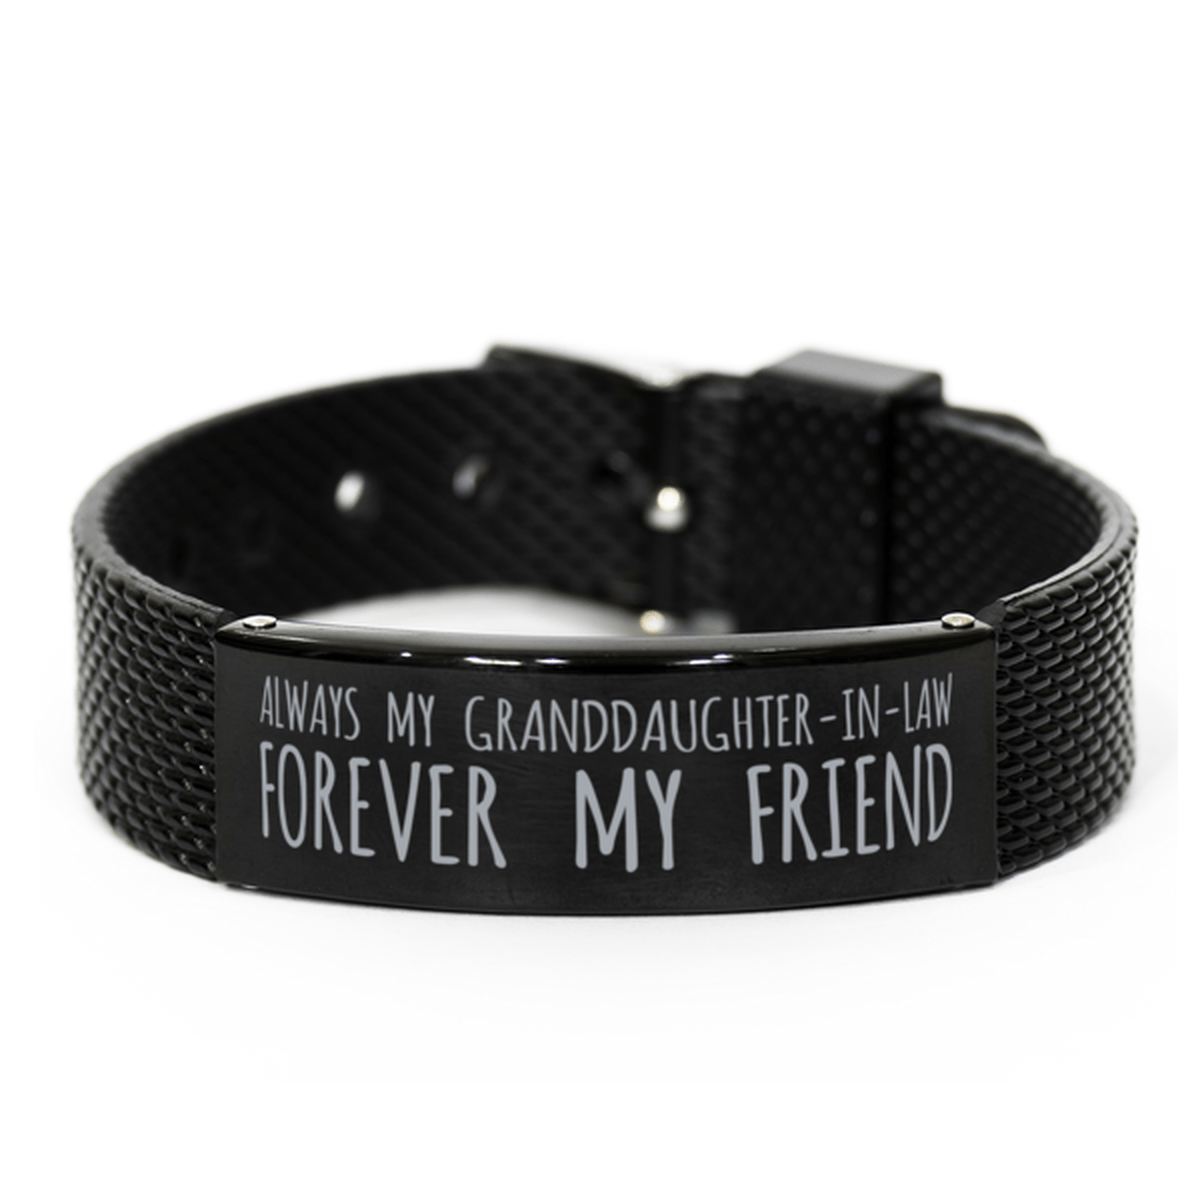 Inspirational Granddaughter-In-Law Black Shark Mesh Bracelet, Always My Granddaughter-In-Law Forever My Friend, Best Birthday Gifts for Family Friends